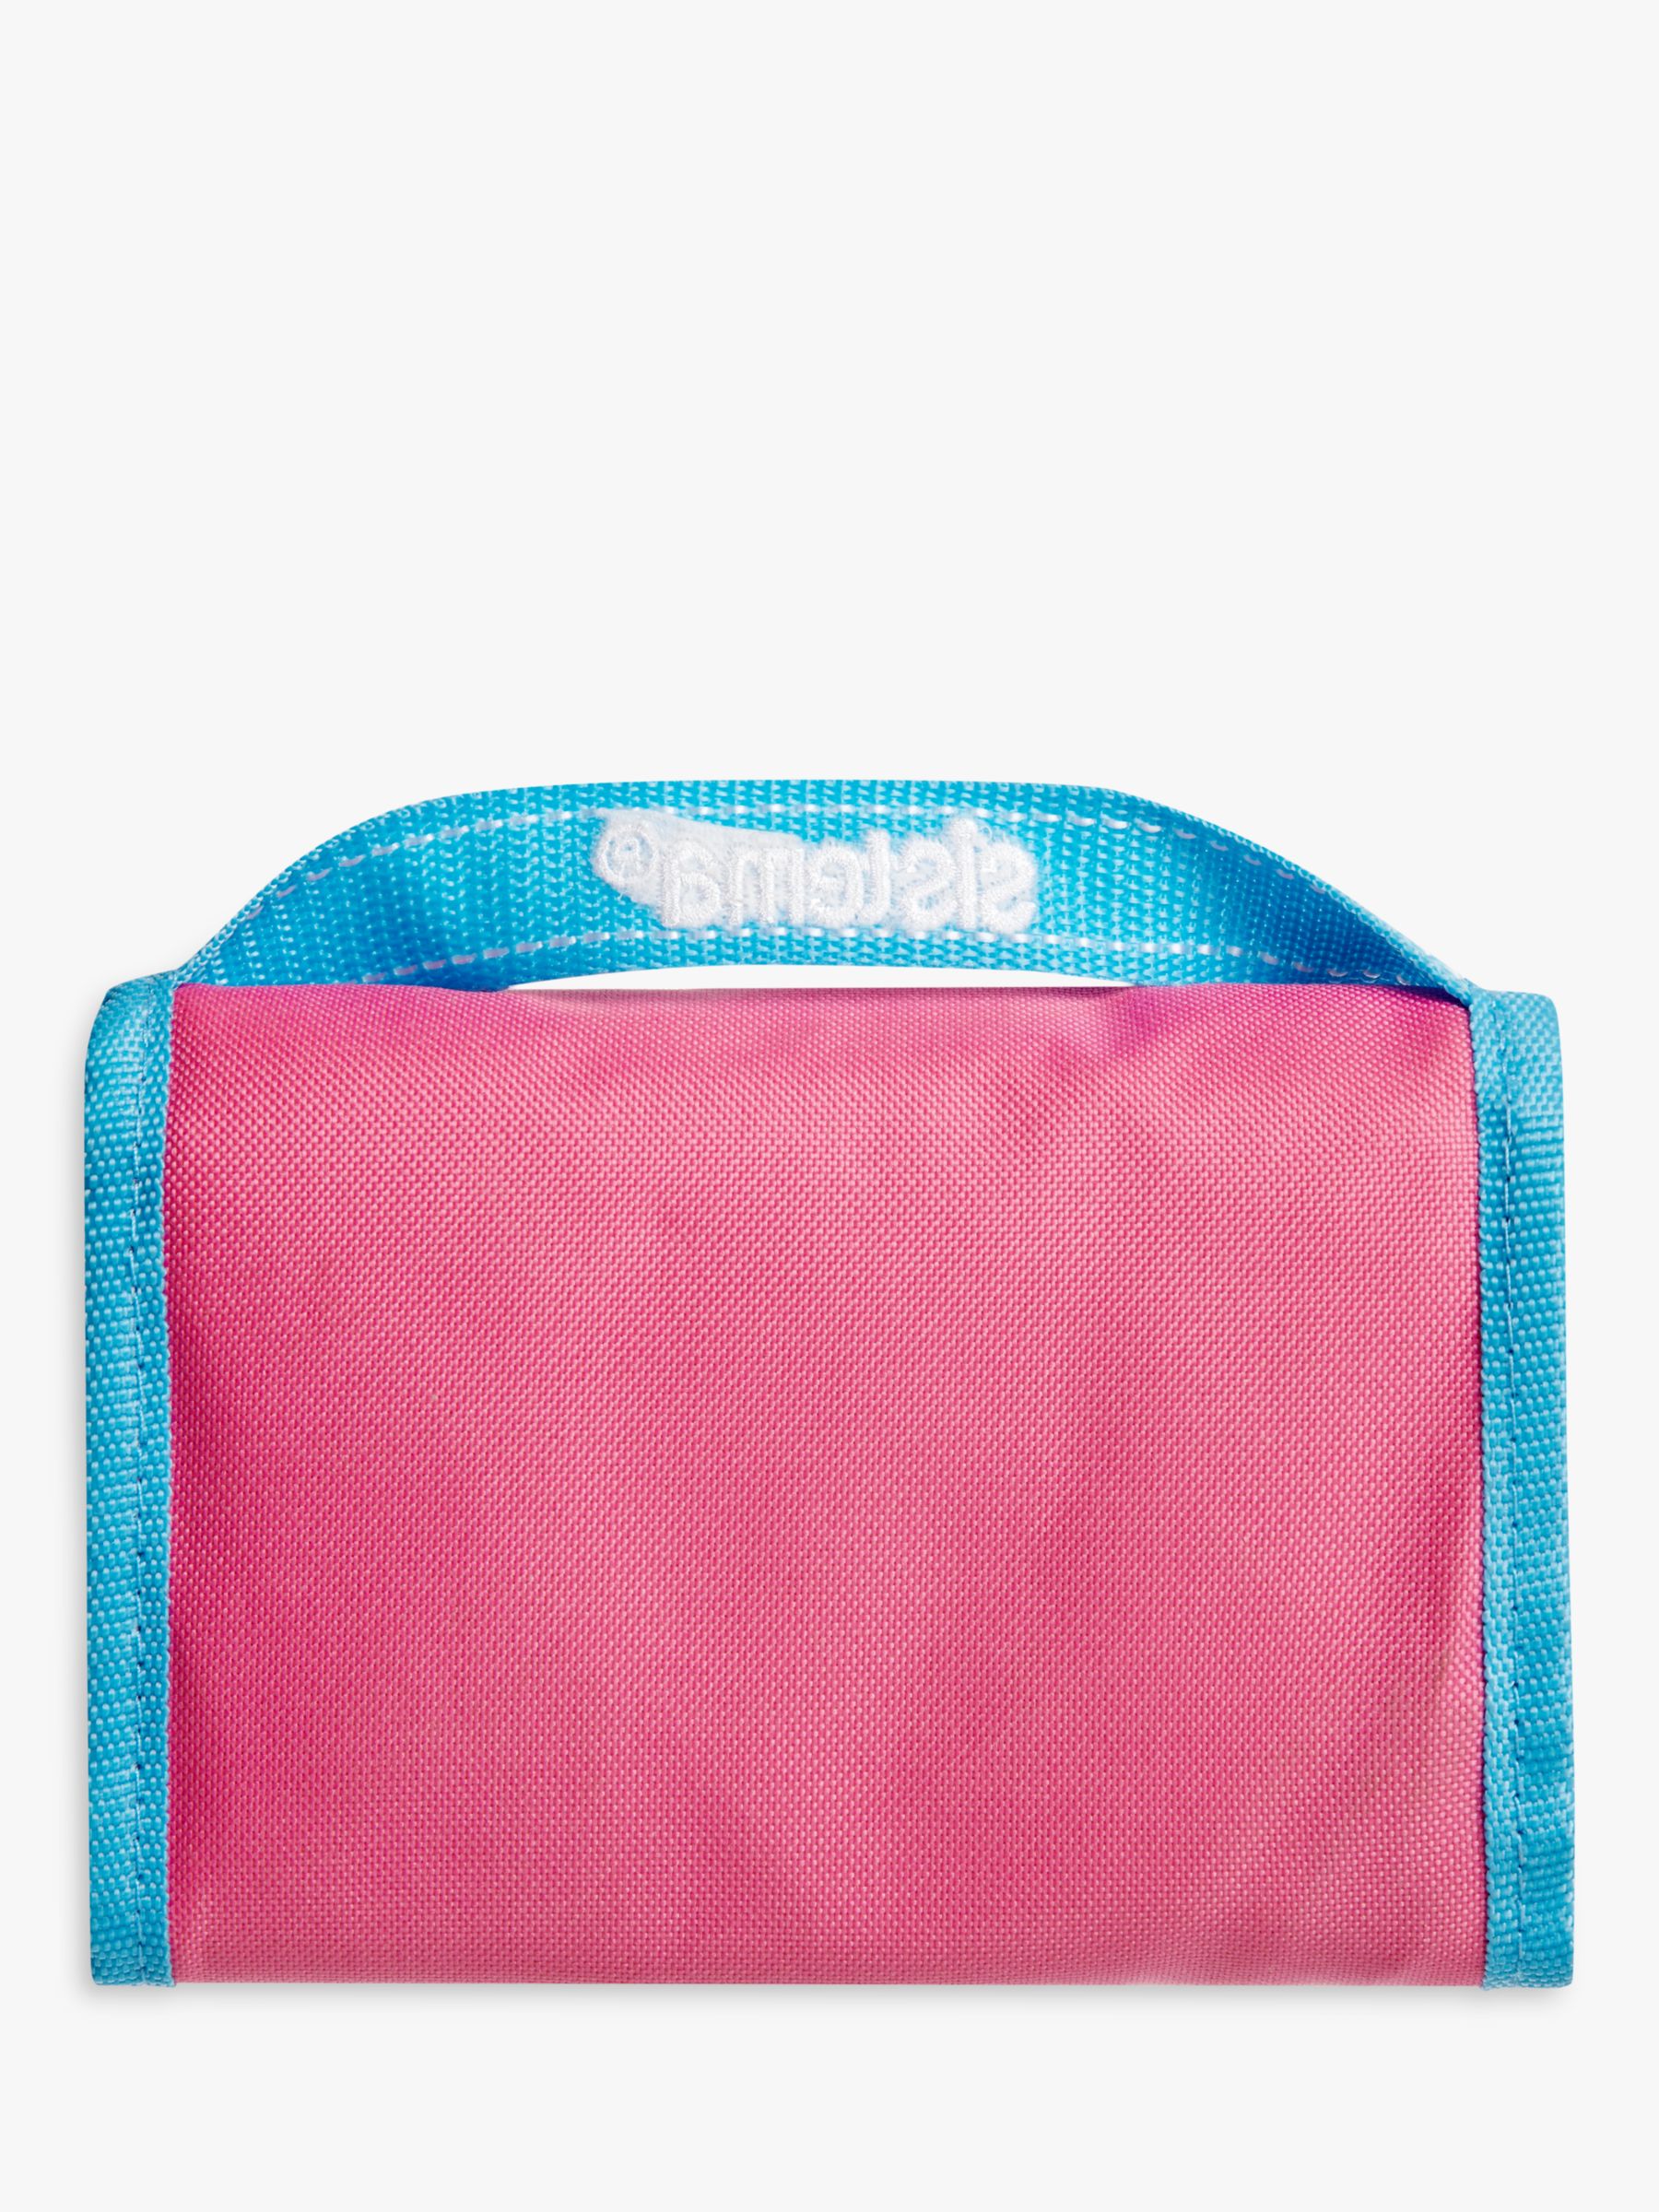 Sistema Lunch To Go Lunch Bag, Assorted